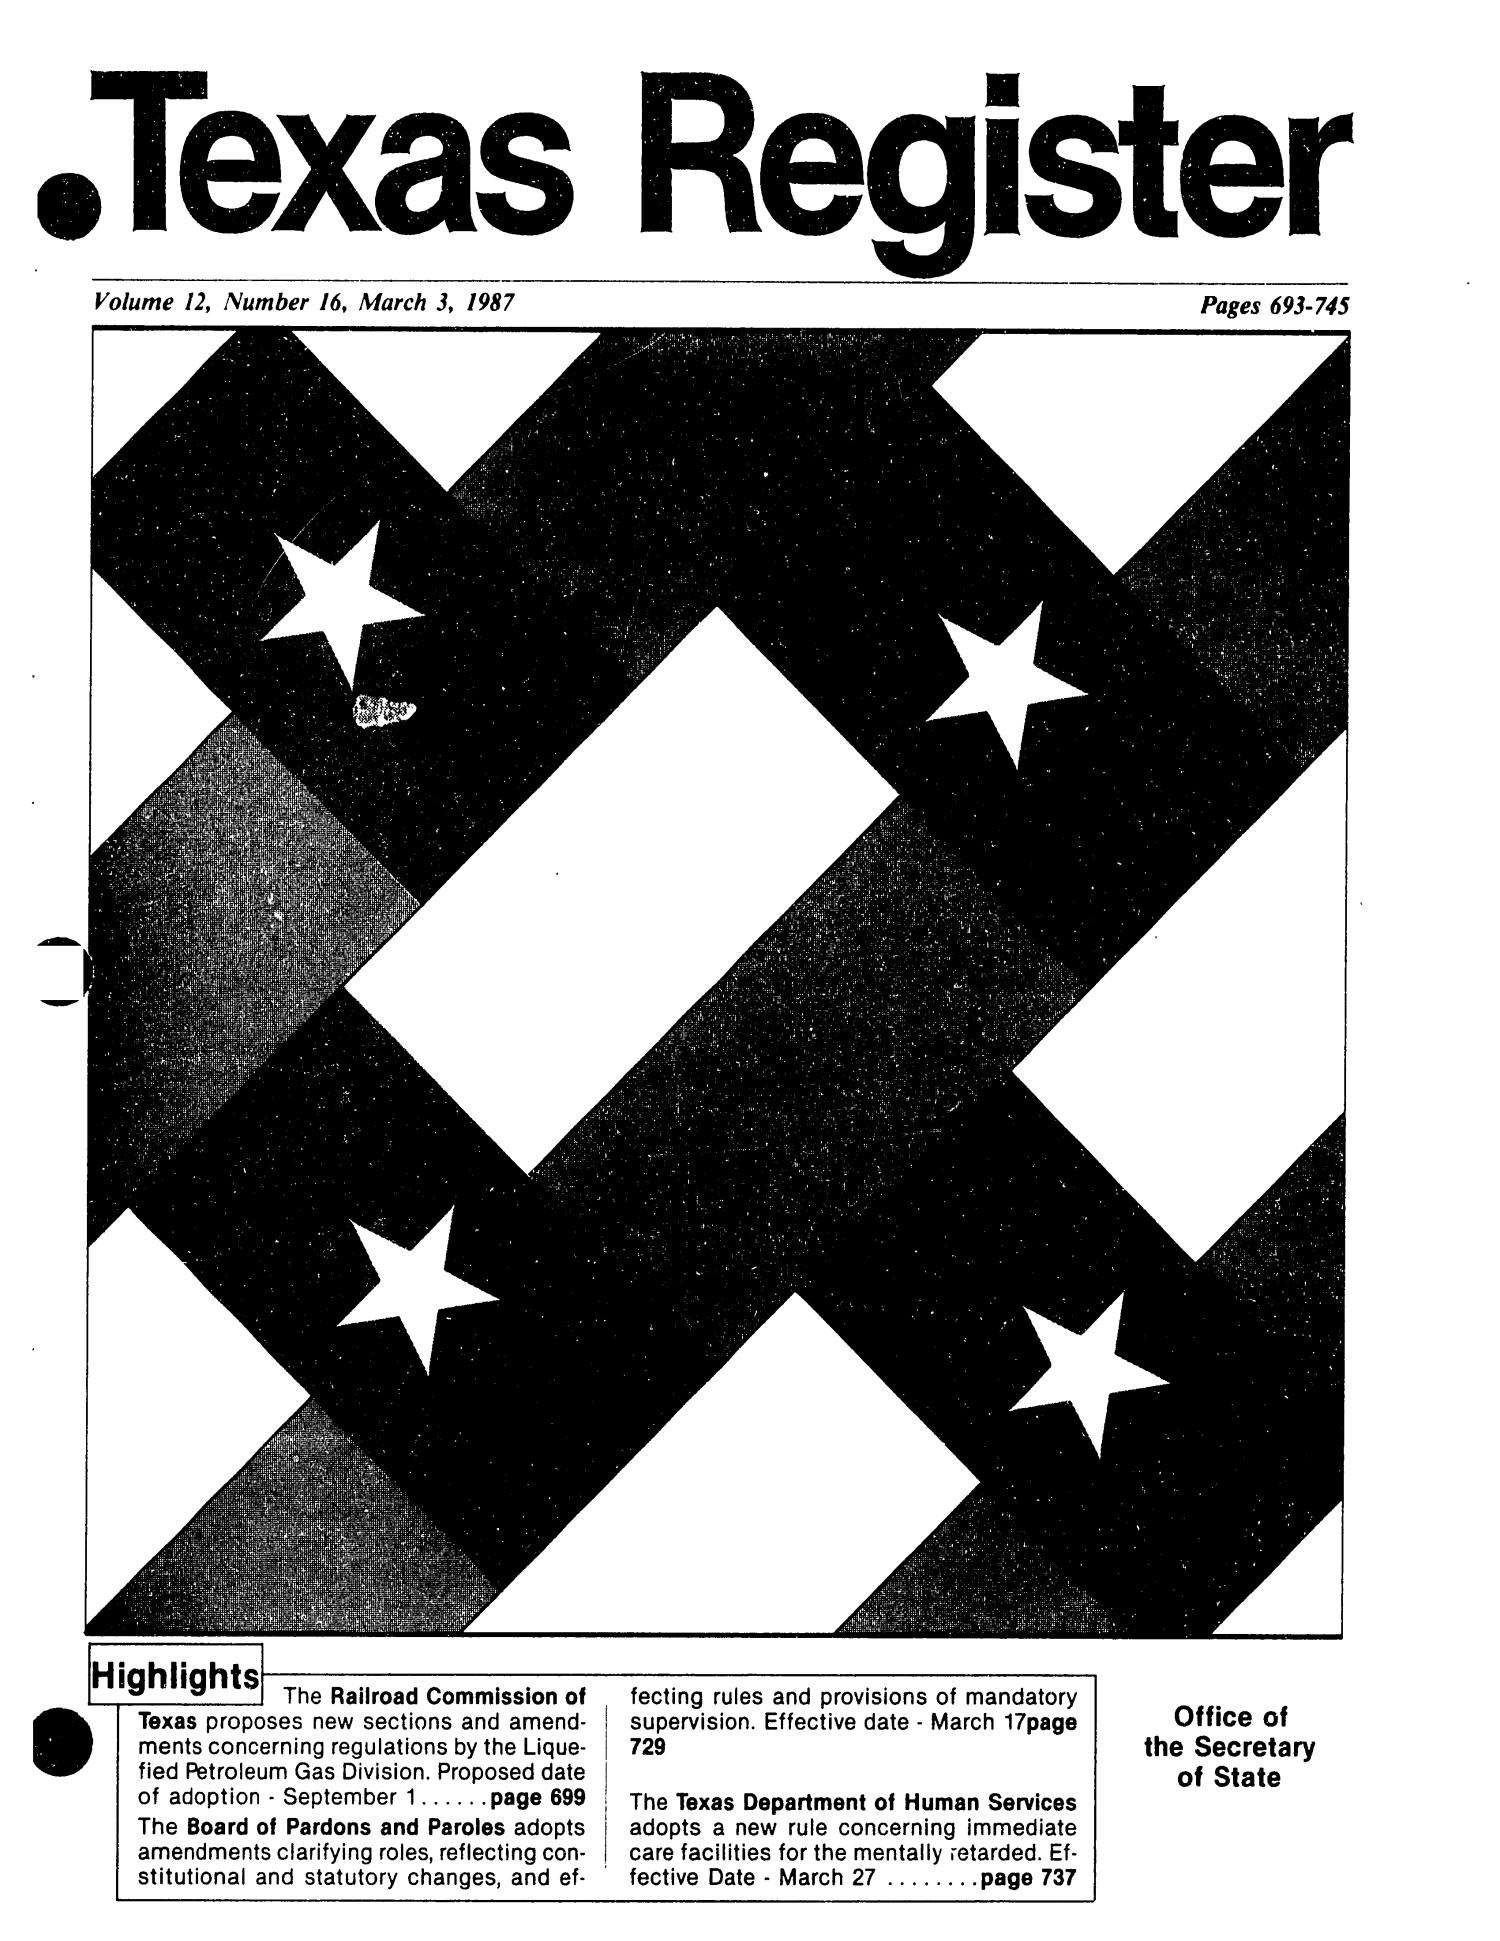 Texas Register, Volume 12, Number 16, Pages 693-745, March 3, 1987
                                                
                                                    Title Page
                                                